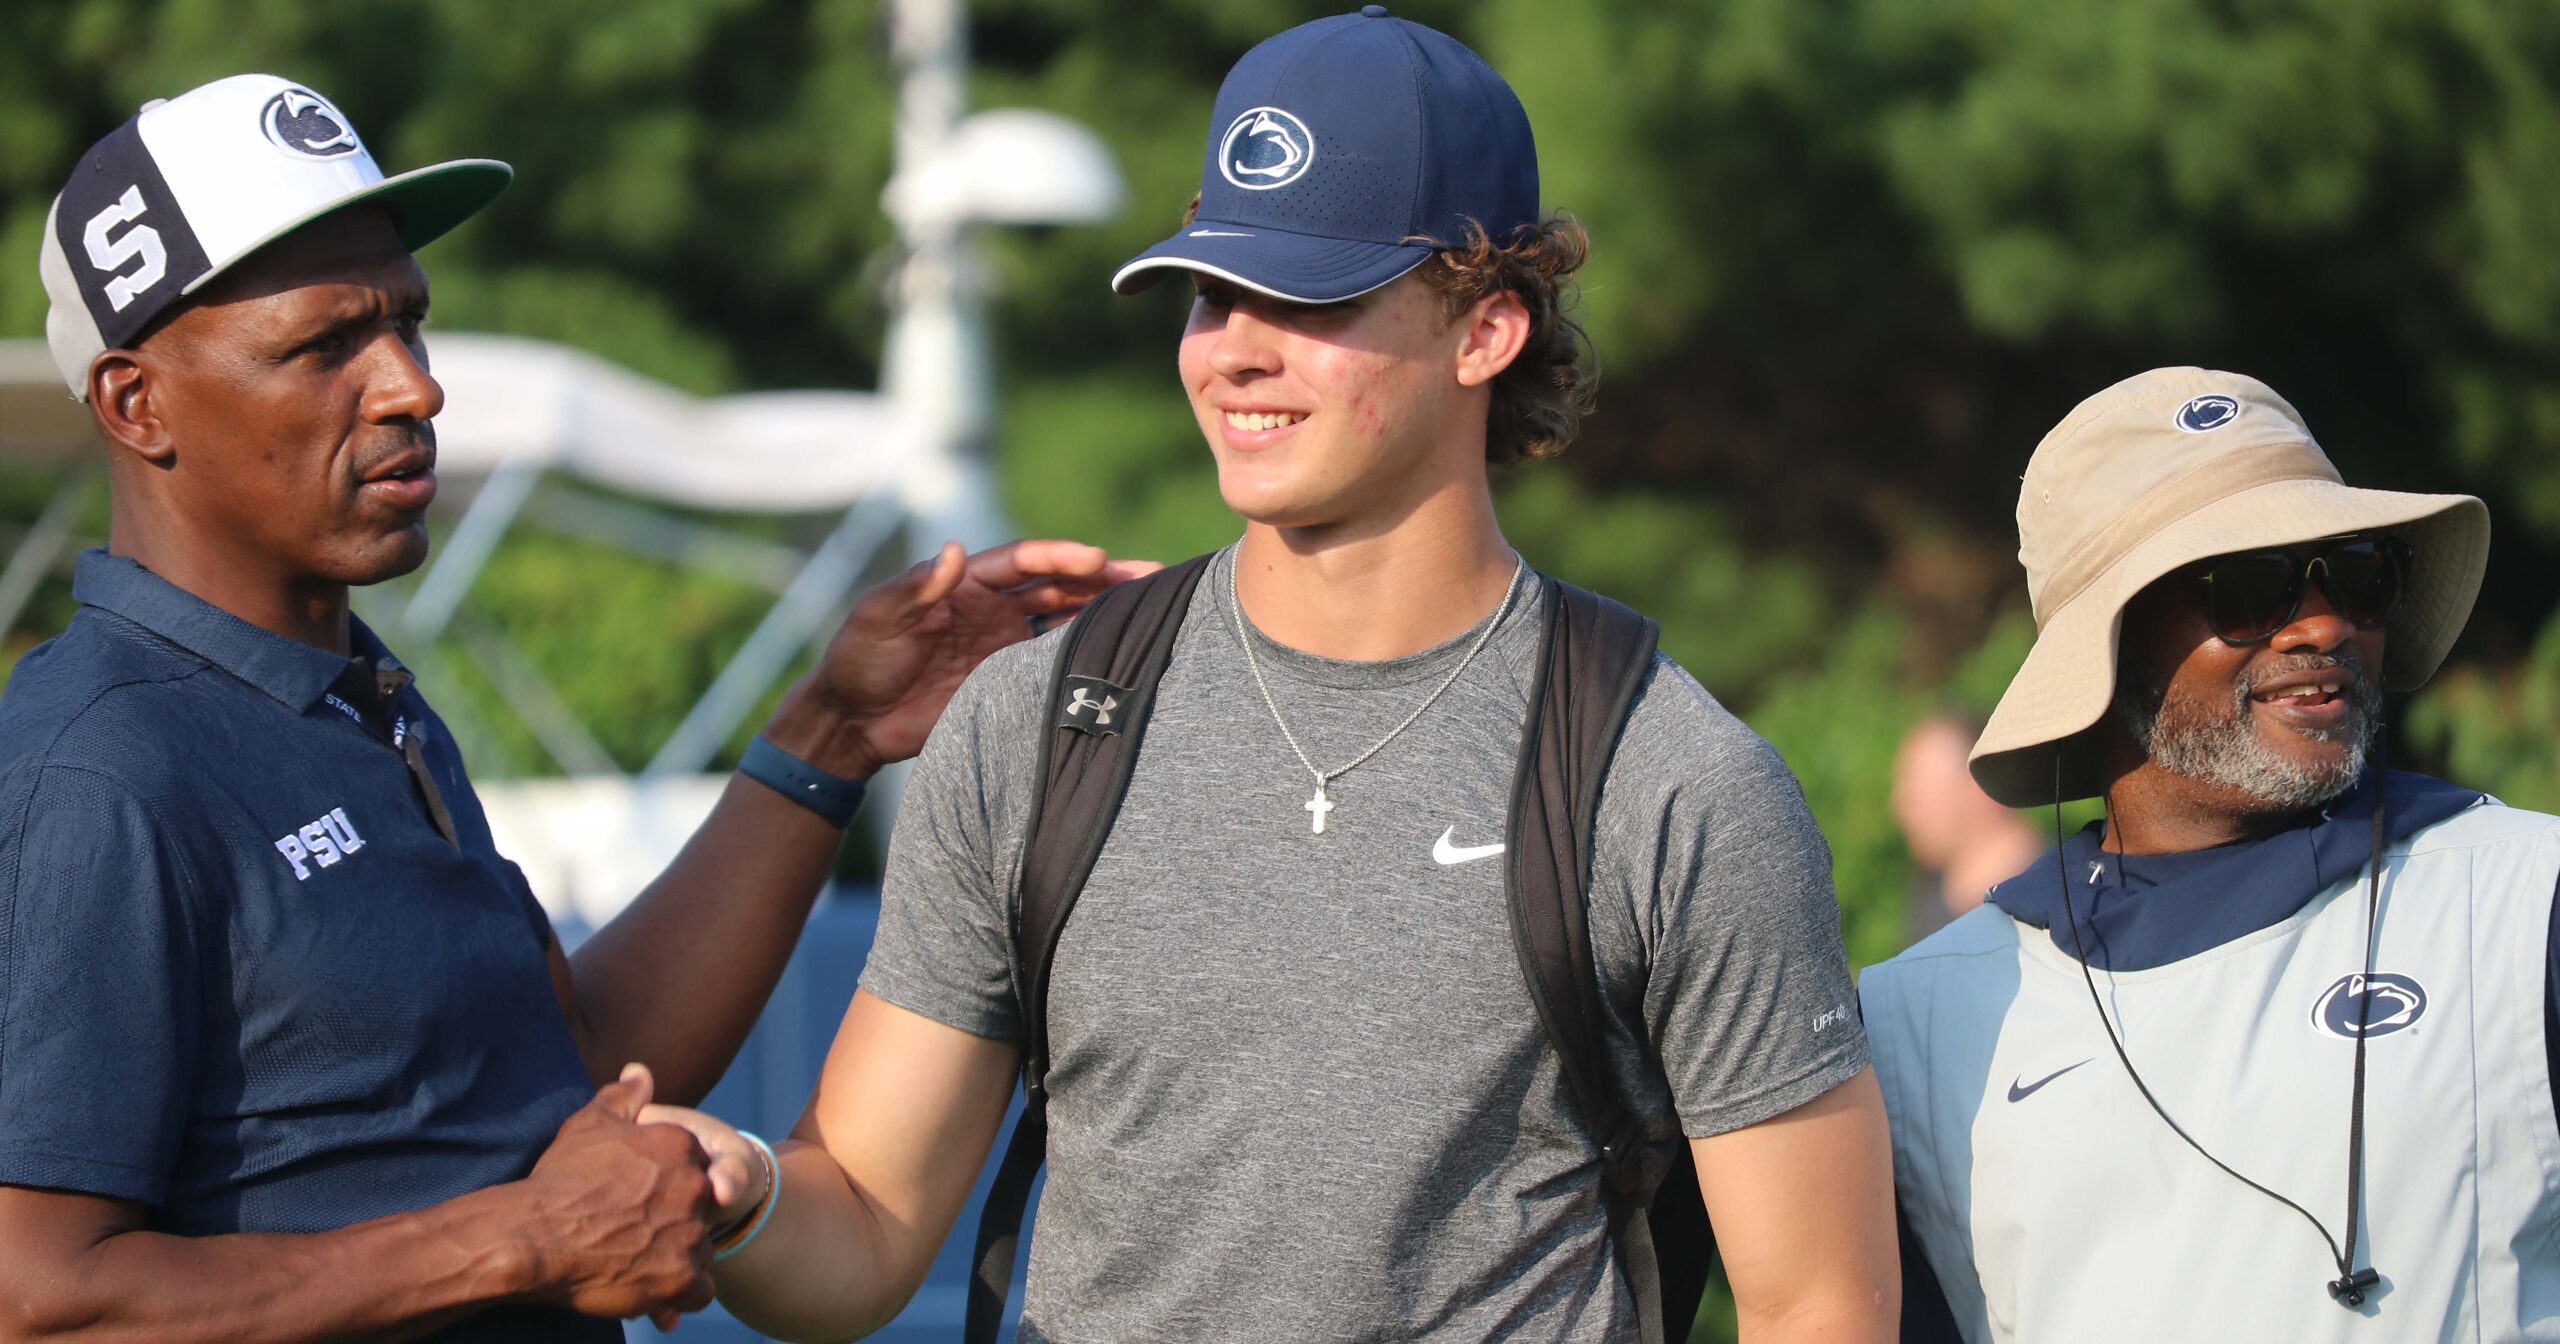 Penn State recruit Anthony Sacca